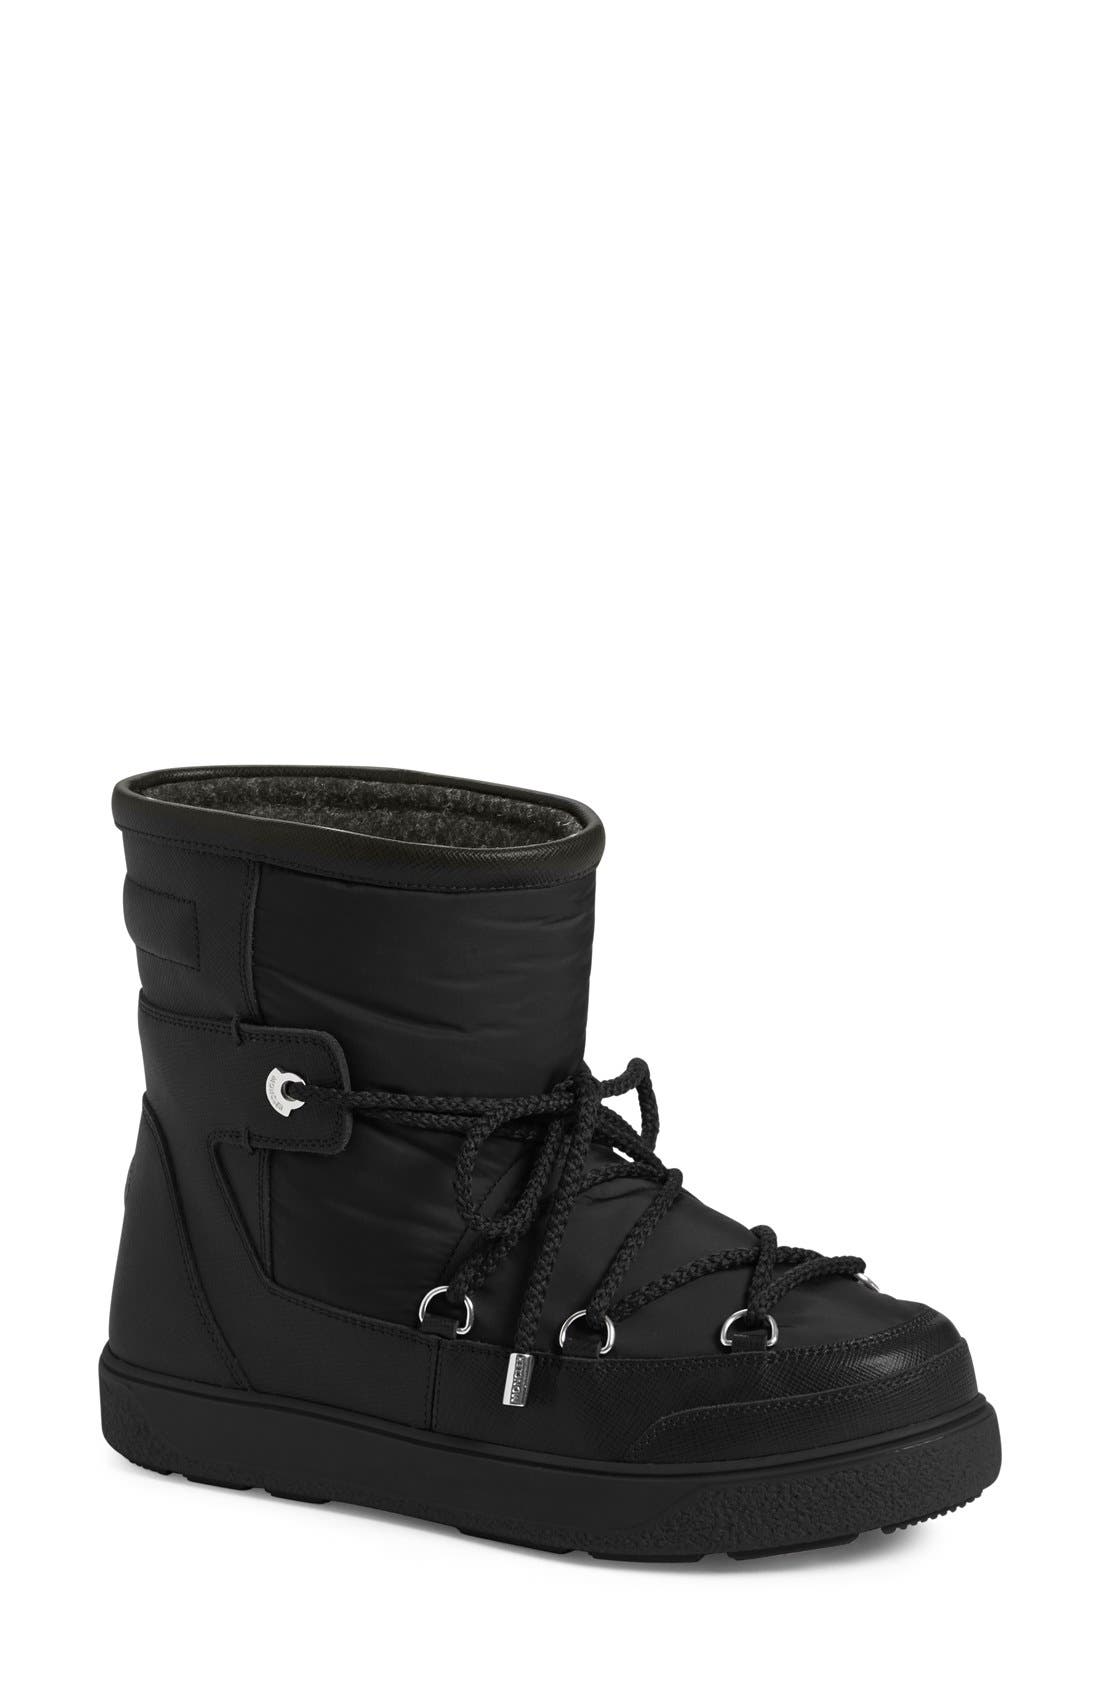 Moncler 'New Fanny' Lace Up Ankle Boot 